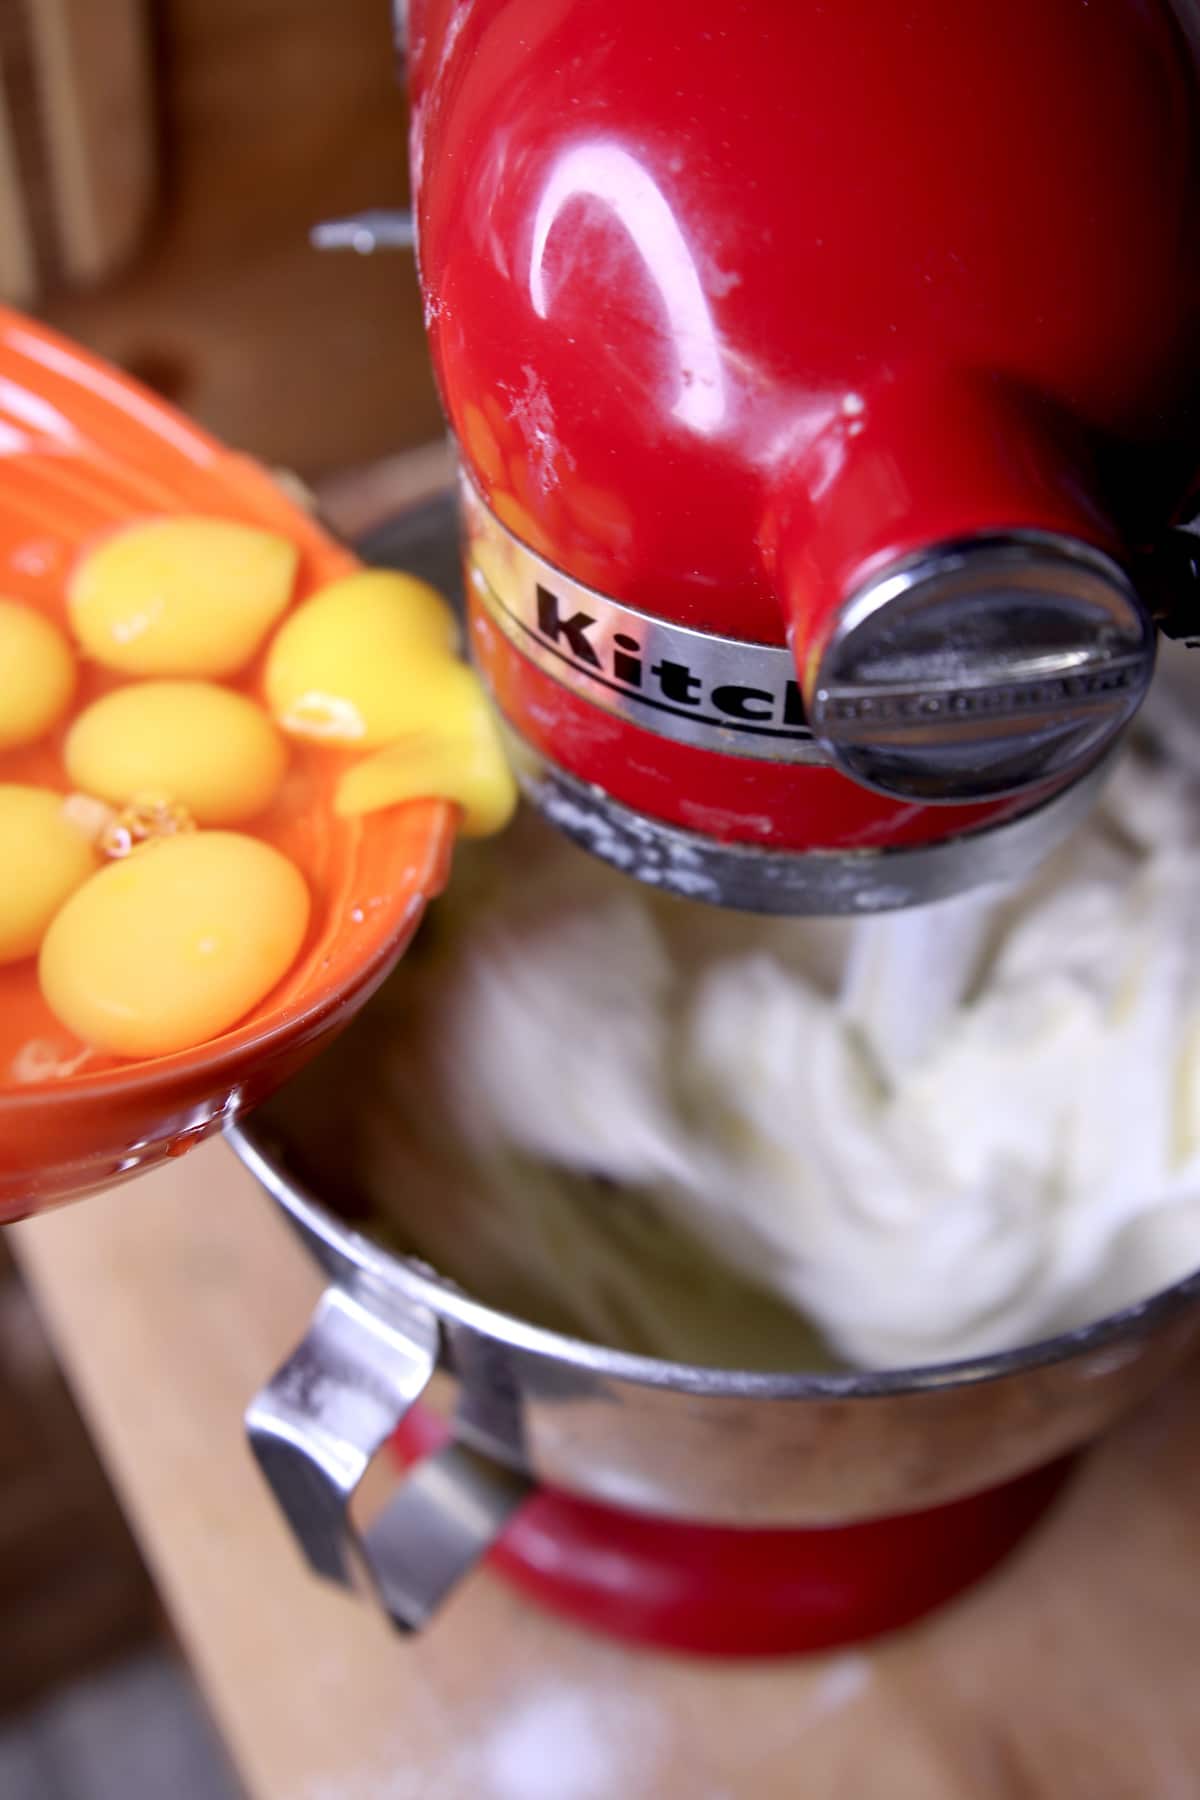 Adding eggs to cake batter in red Kitchenaid Mixer.